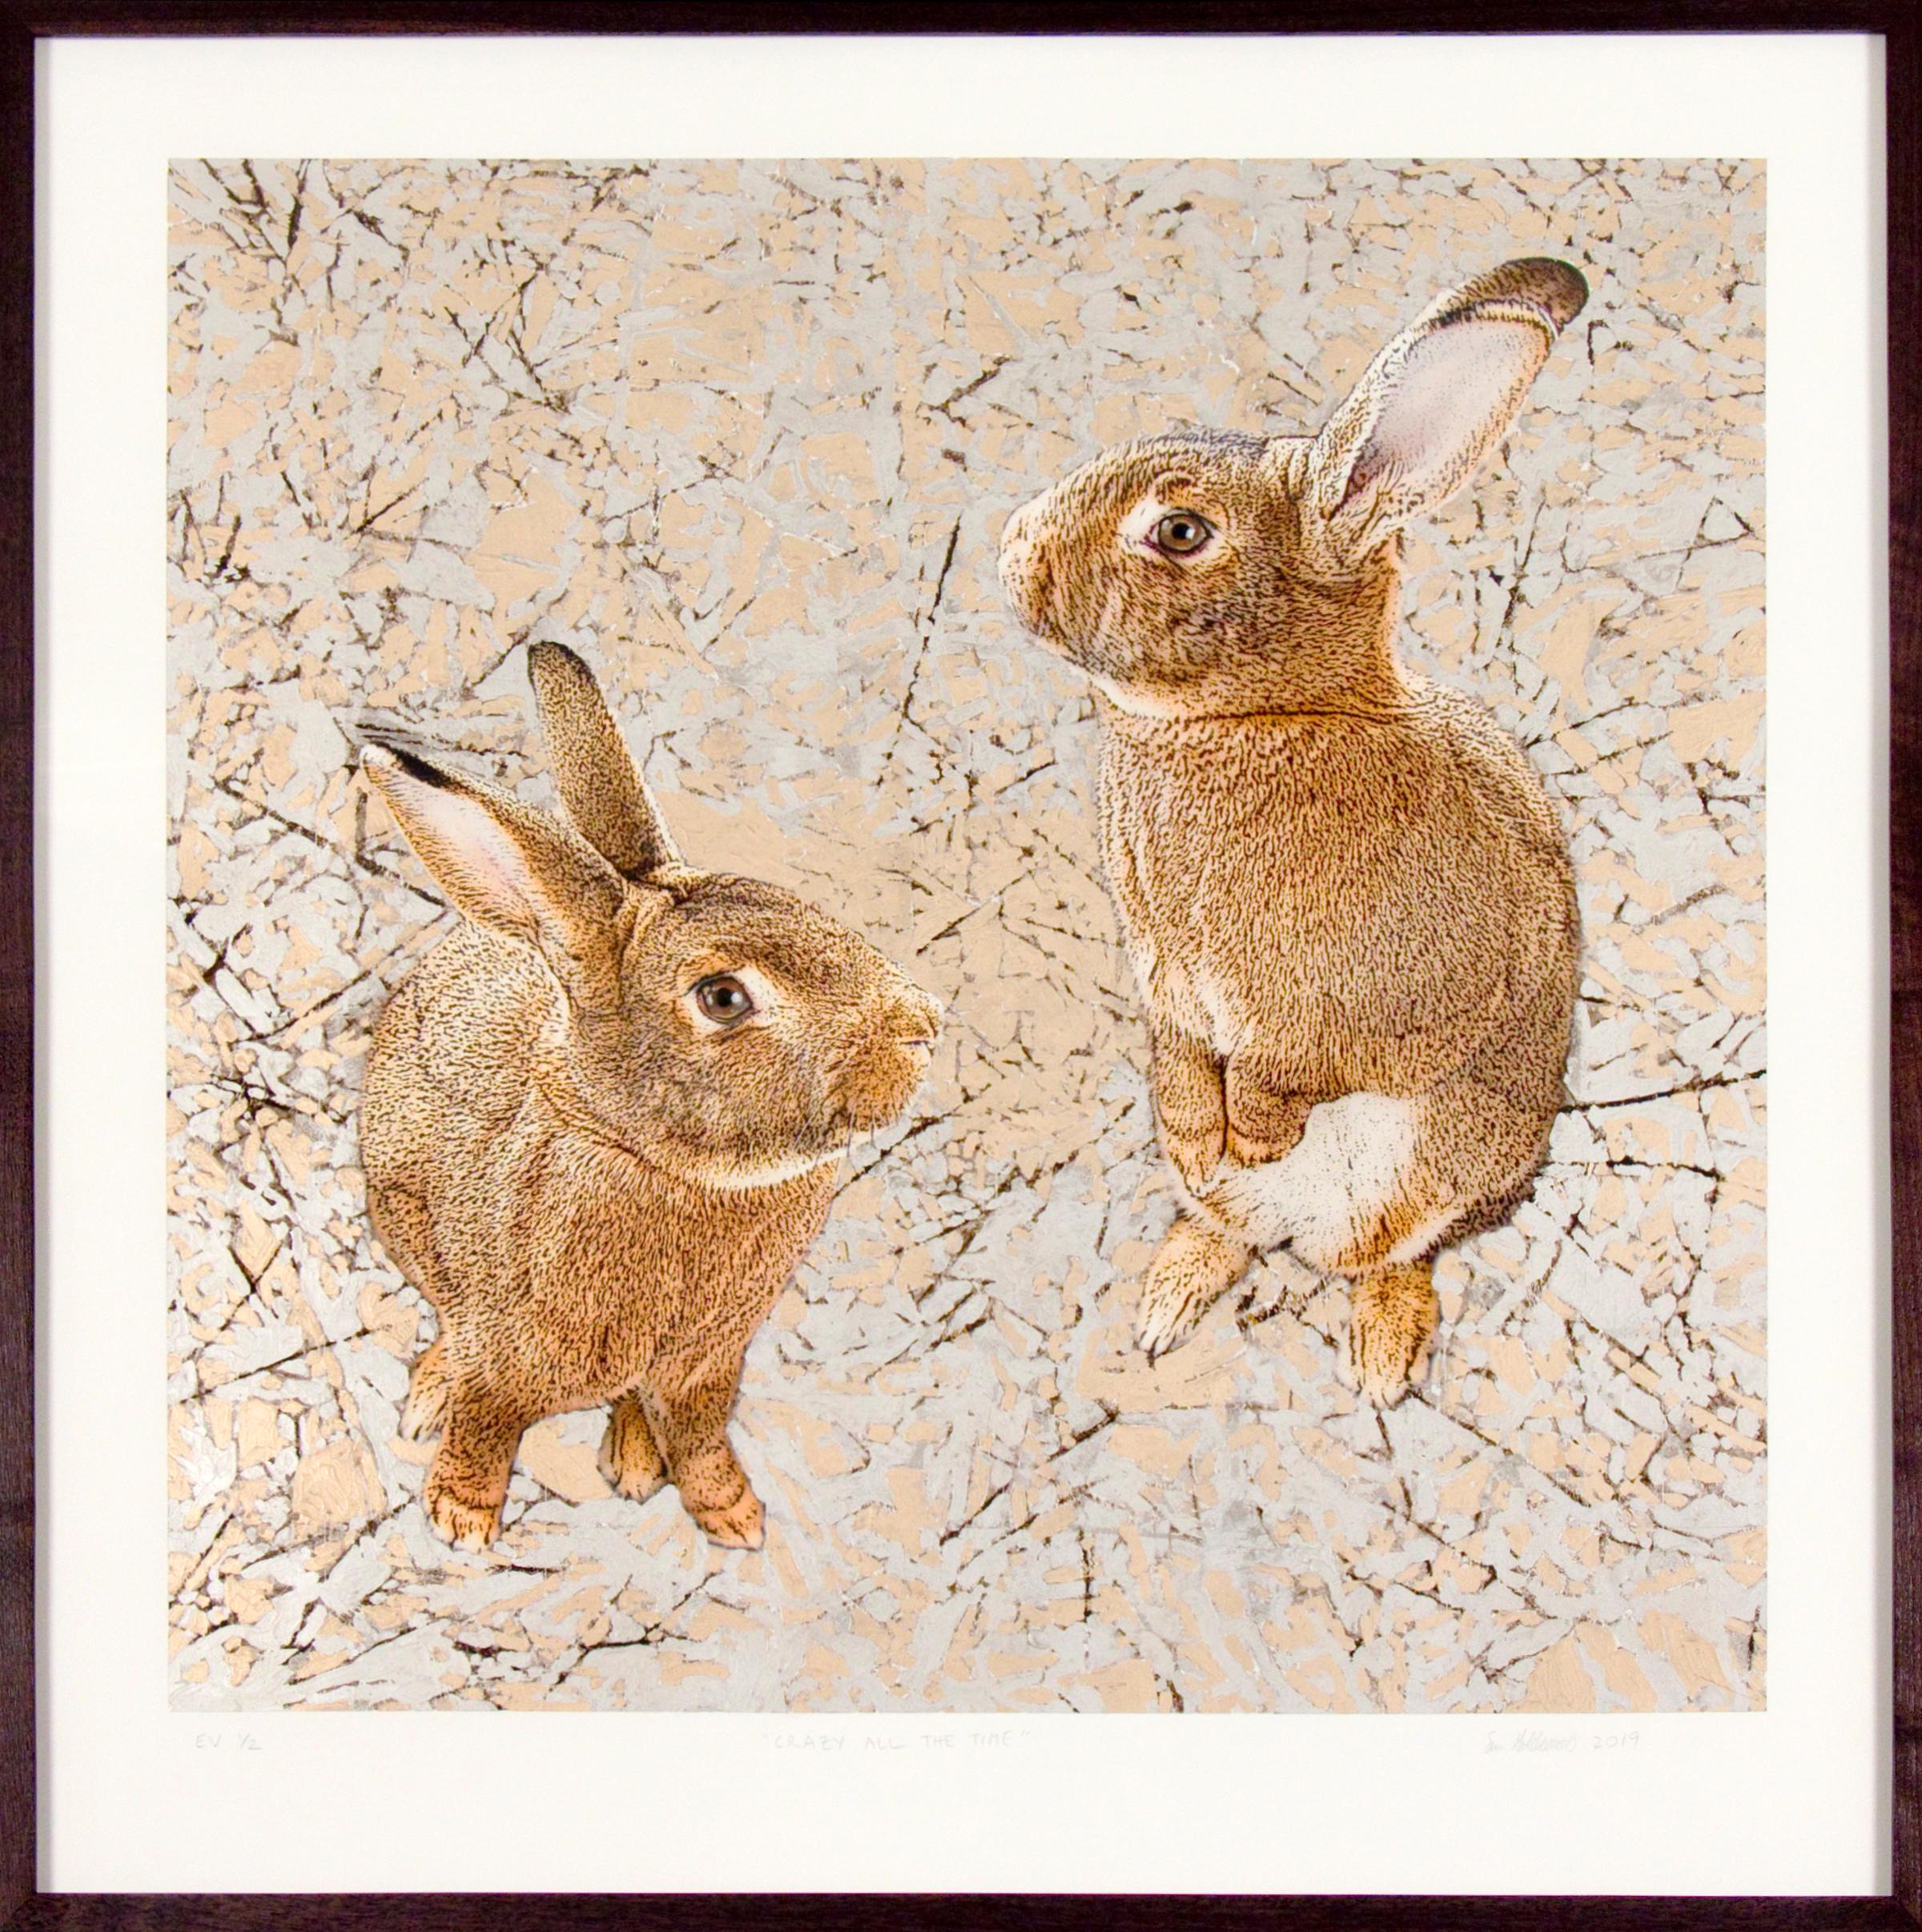 Crazy All the Time, Mixed Media Contemporary, Rabbits, Bunnies, Abstract - Mixed Media Art by Susan Goldsmith